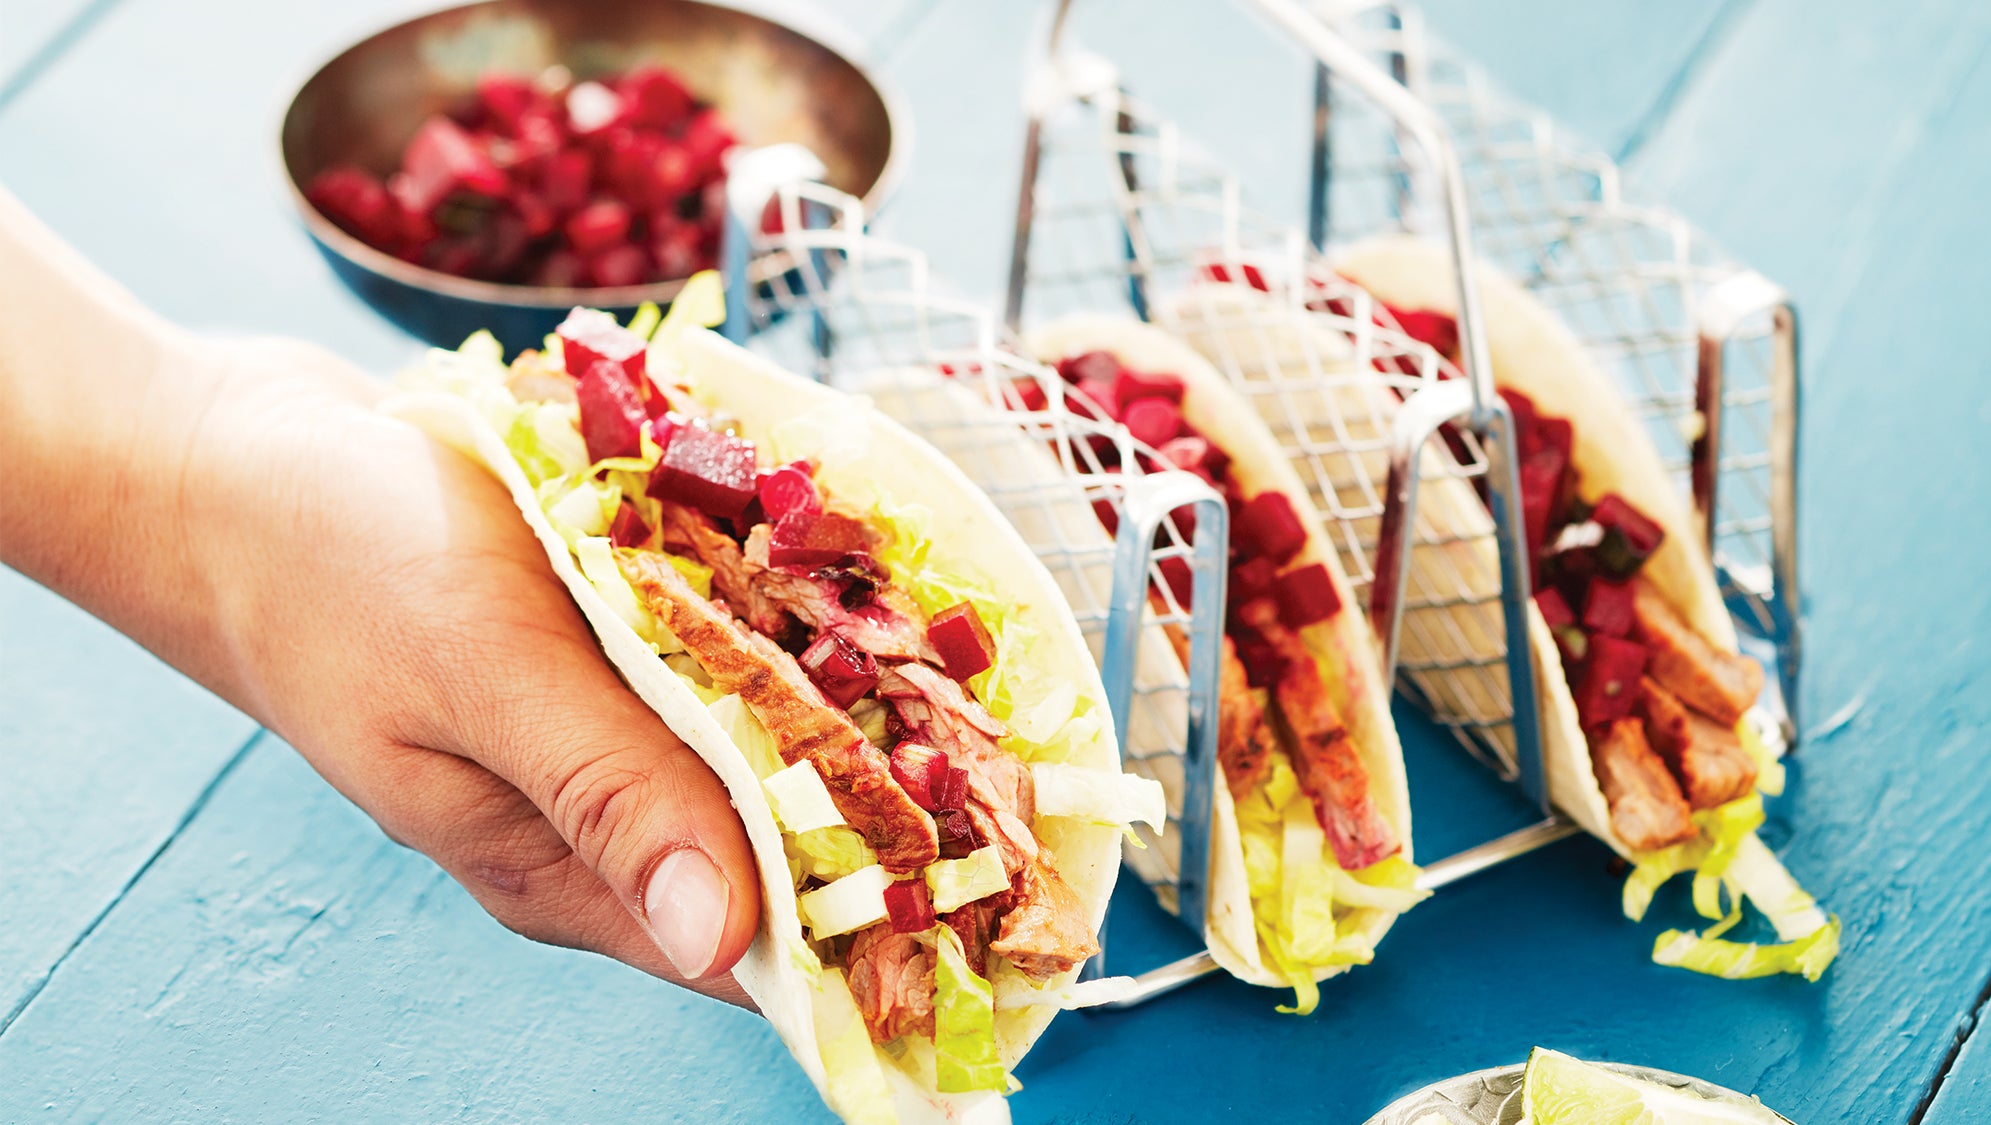 Herbed Skirt Steak Tacos with Beet and Fresno Chile Salsa recipe